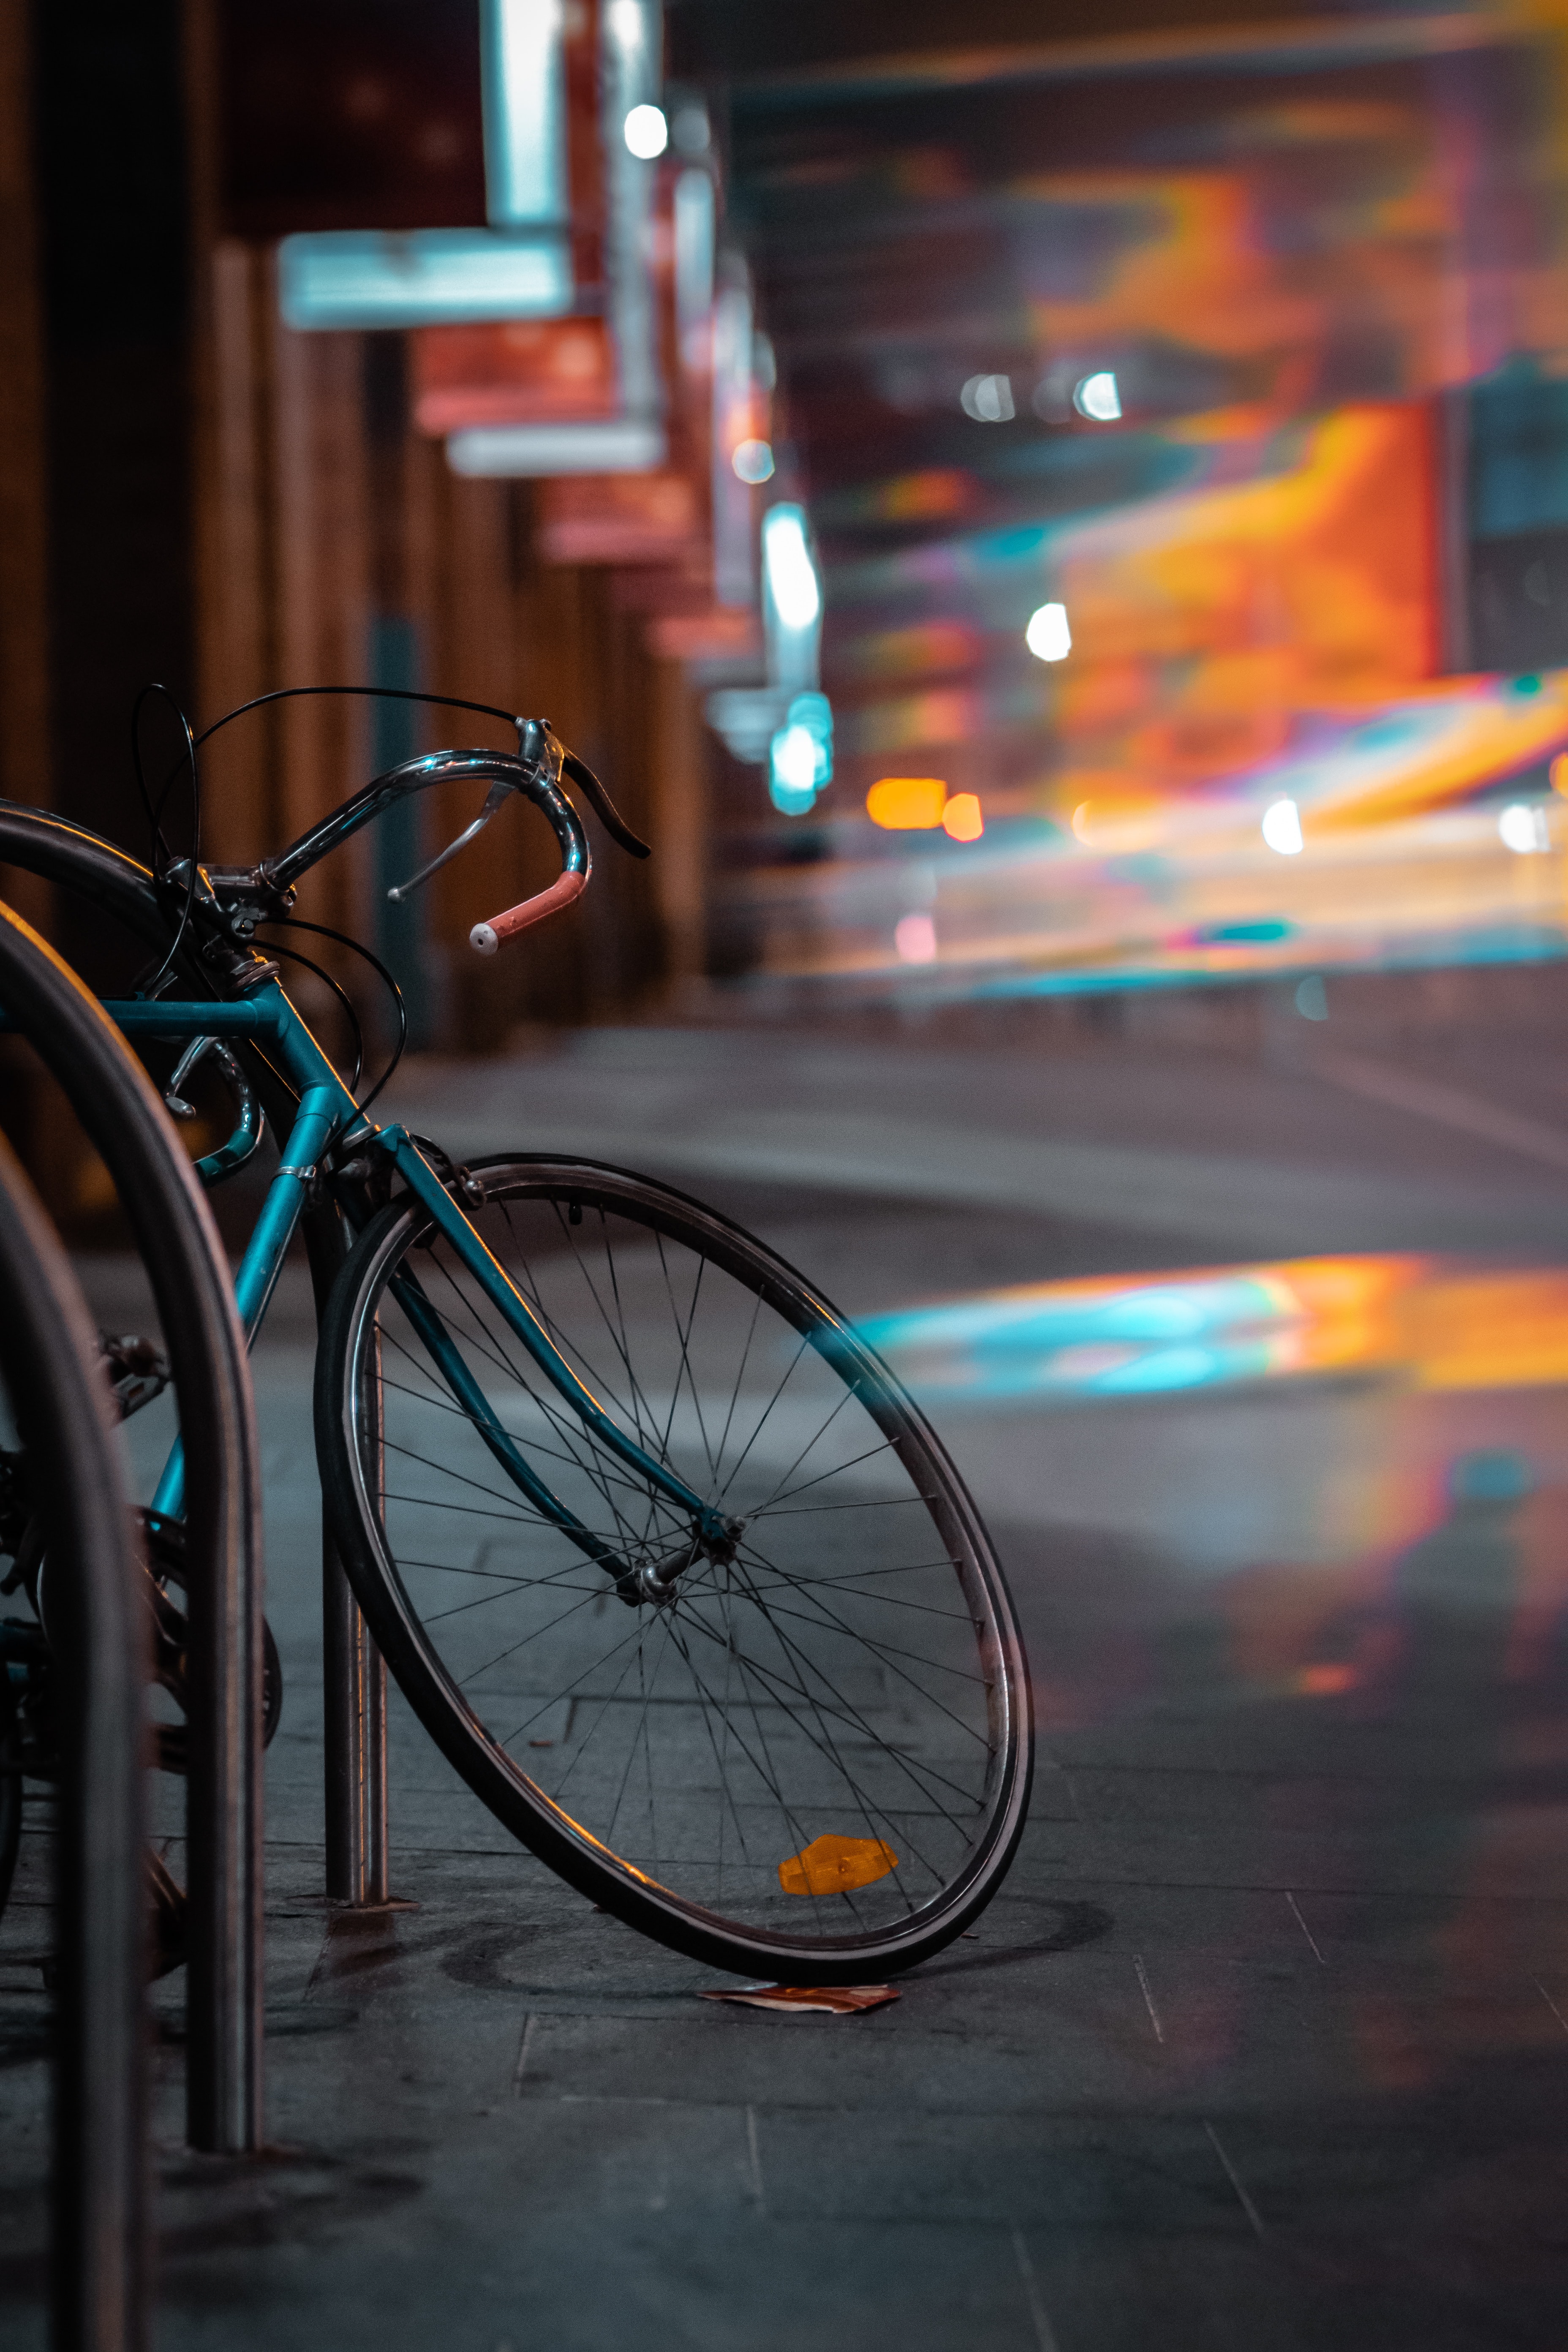 wheels, miscellaneous, smooth, blur, bicycle, miscellanea, glare, evening, transport phone wallpaper